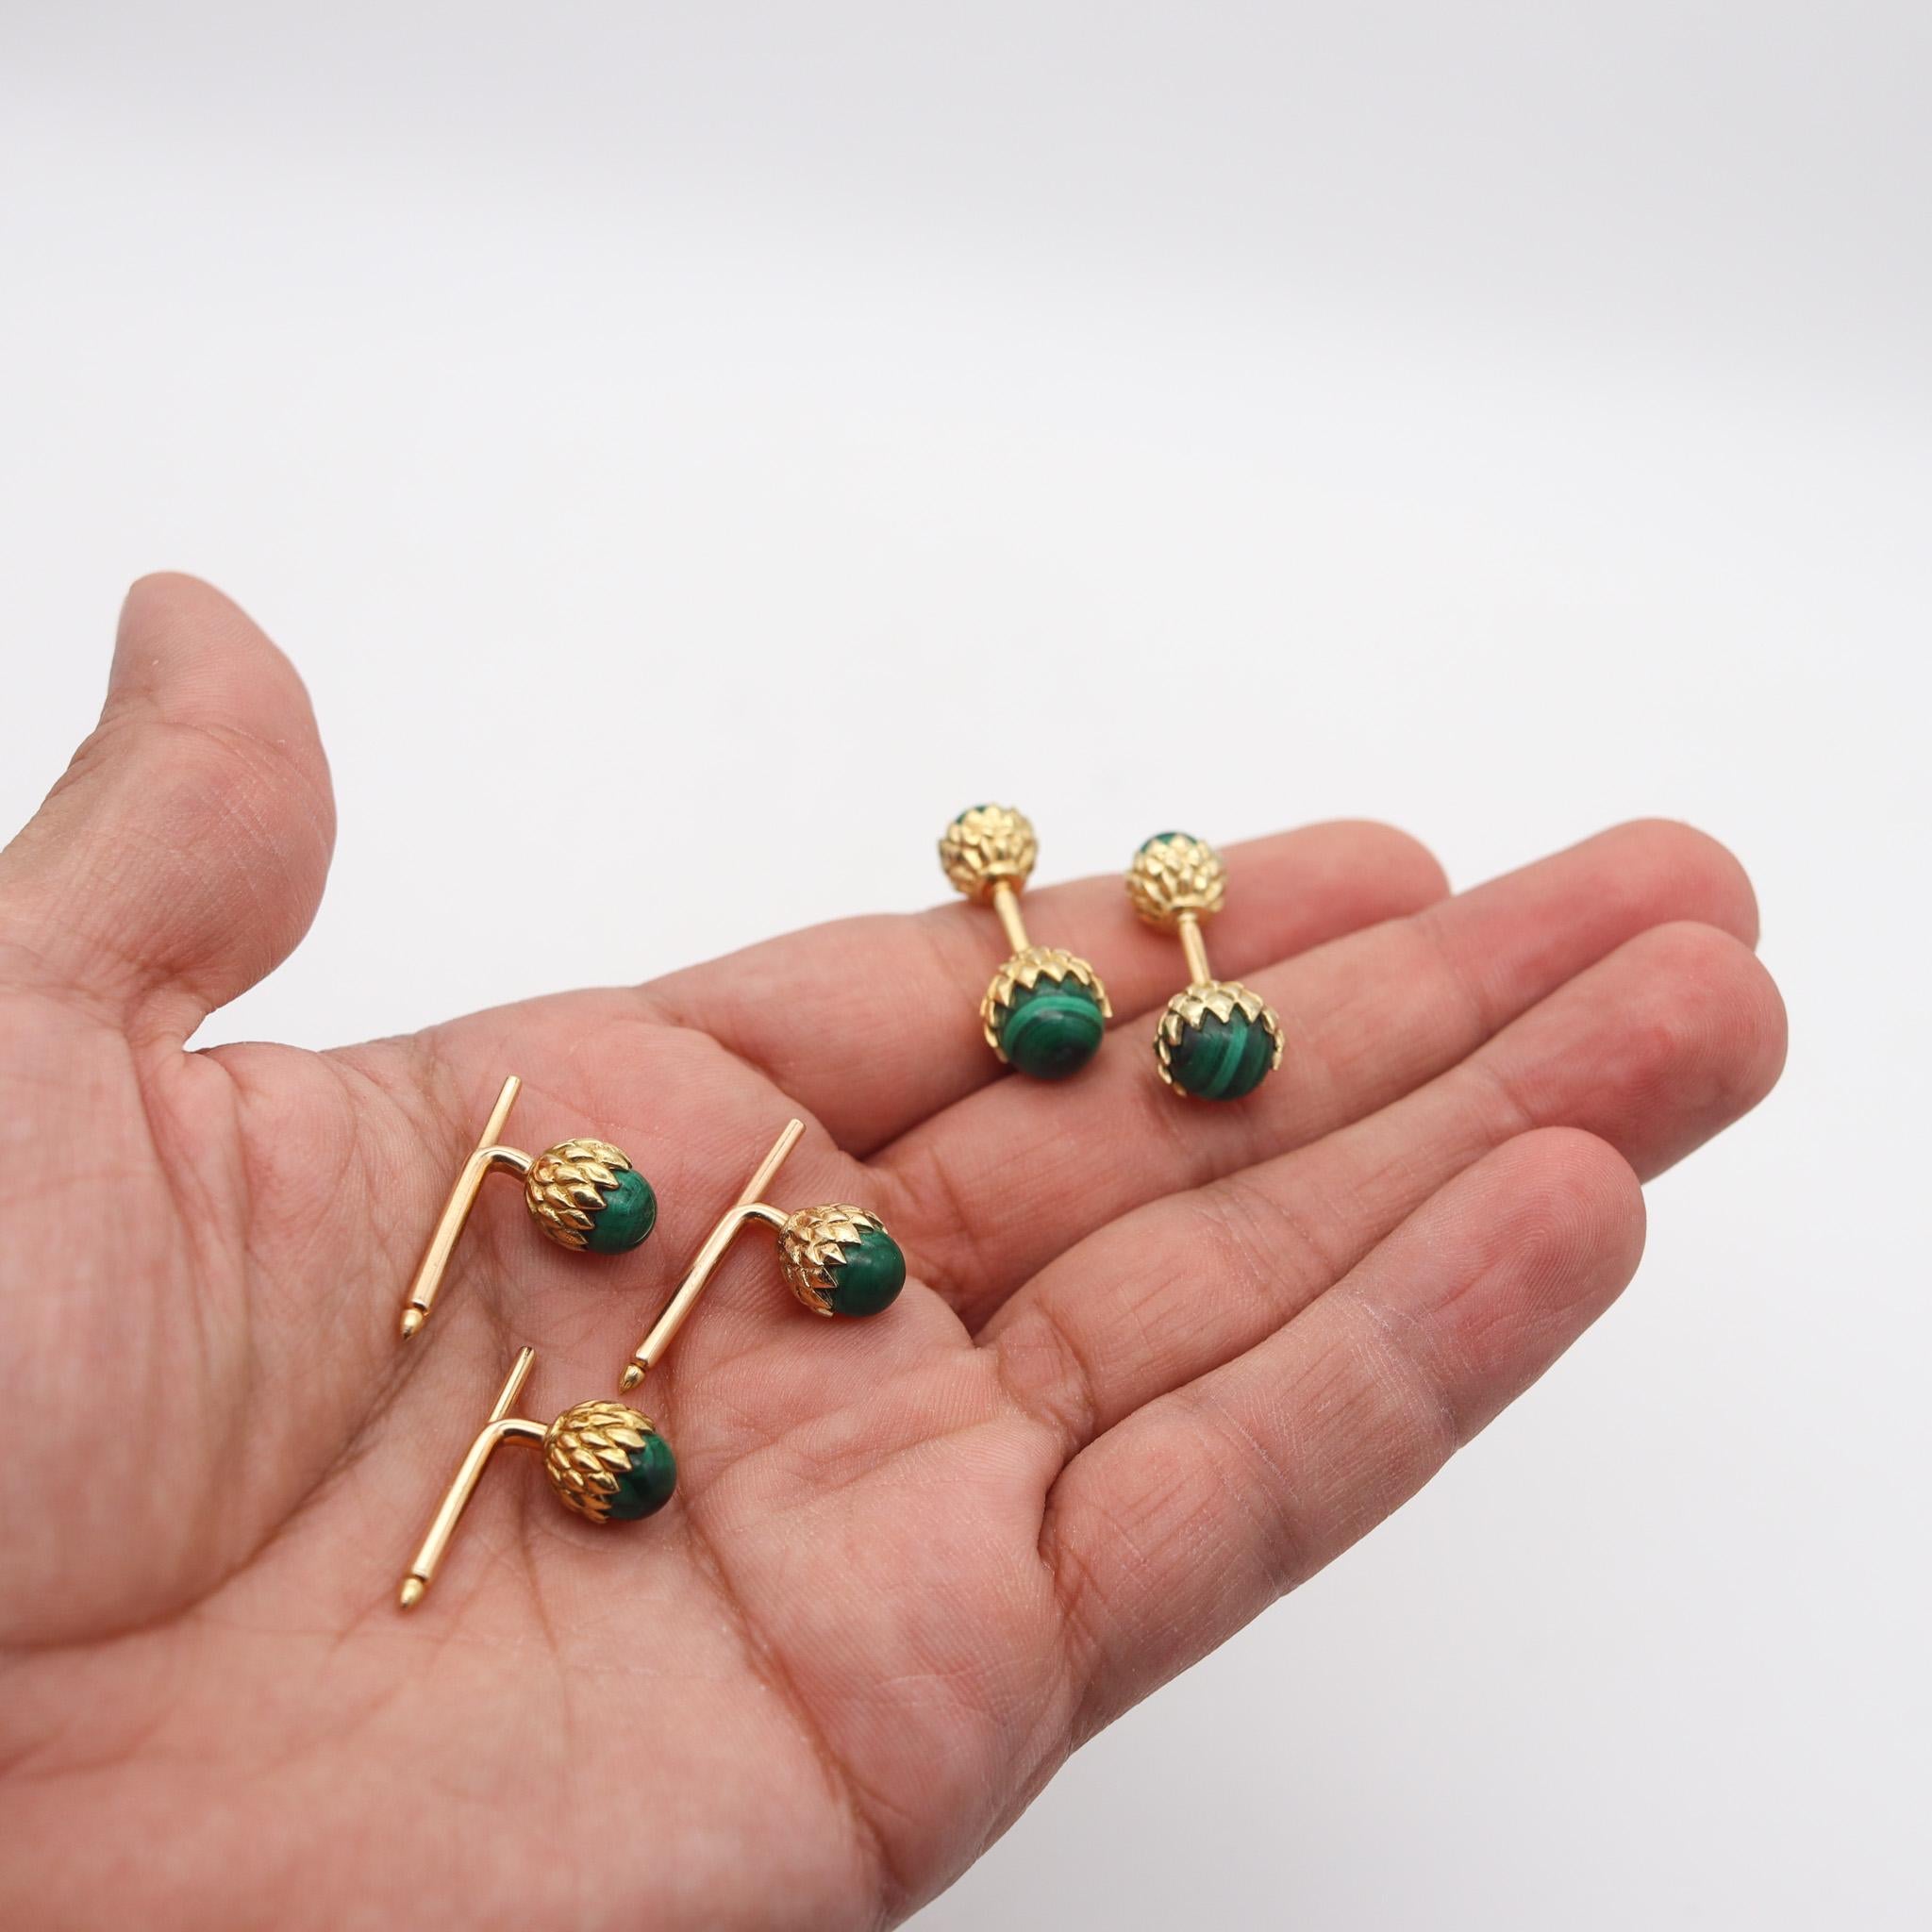 Tiffany & Co. 1970 Jean Schlumberger Cufflinks Shirt Studs 18Kt Gold & Malachite In Excellent Condition For Sale In Miami, FL